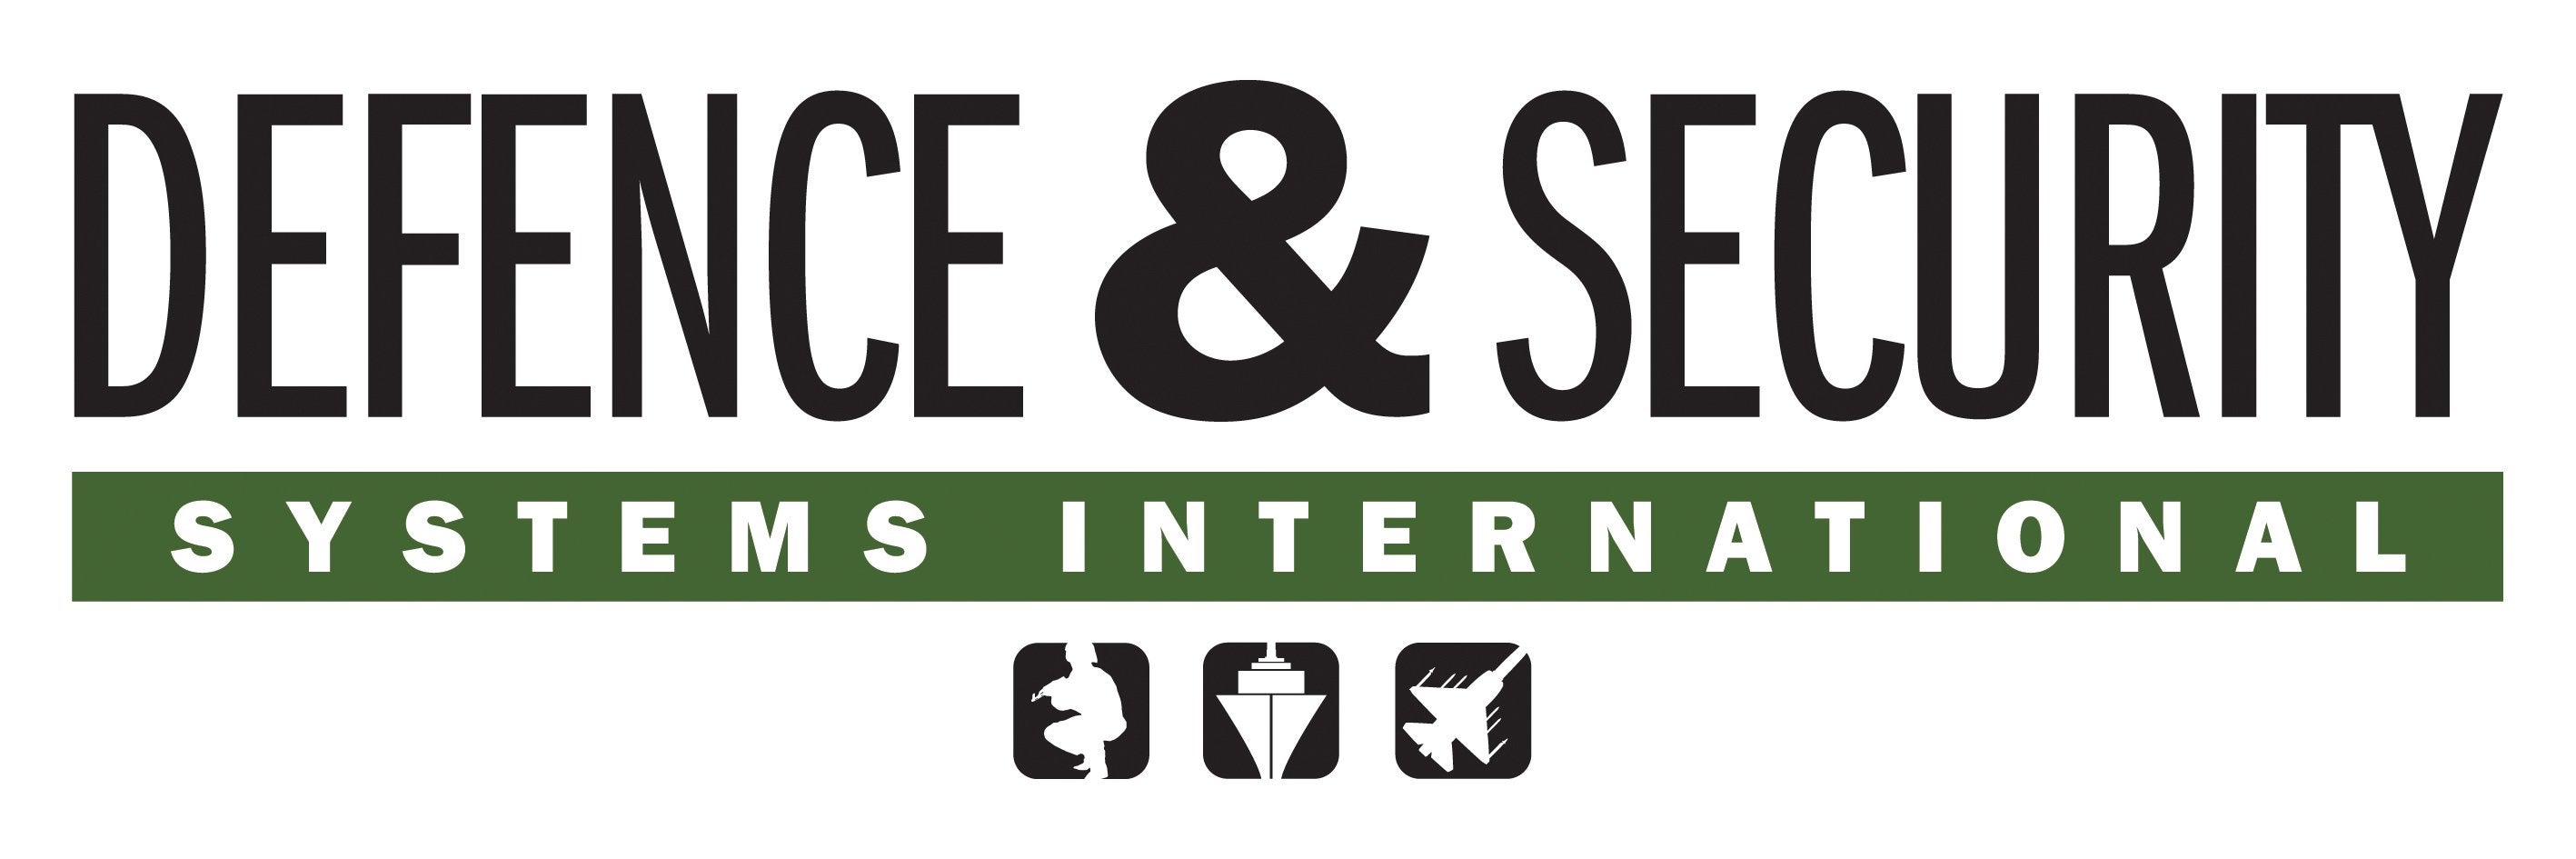 Defence & Security Systems International